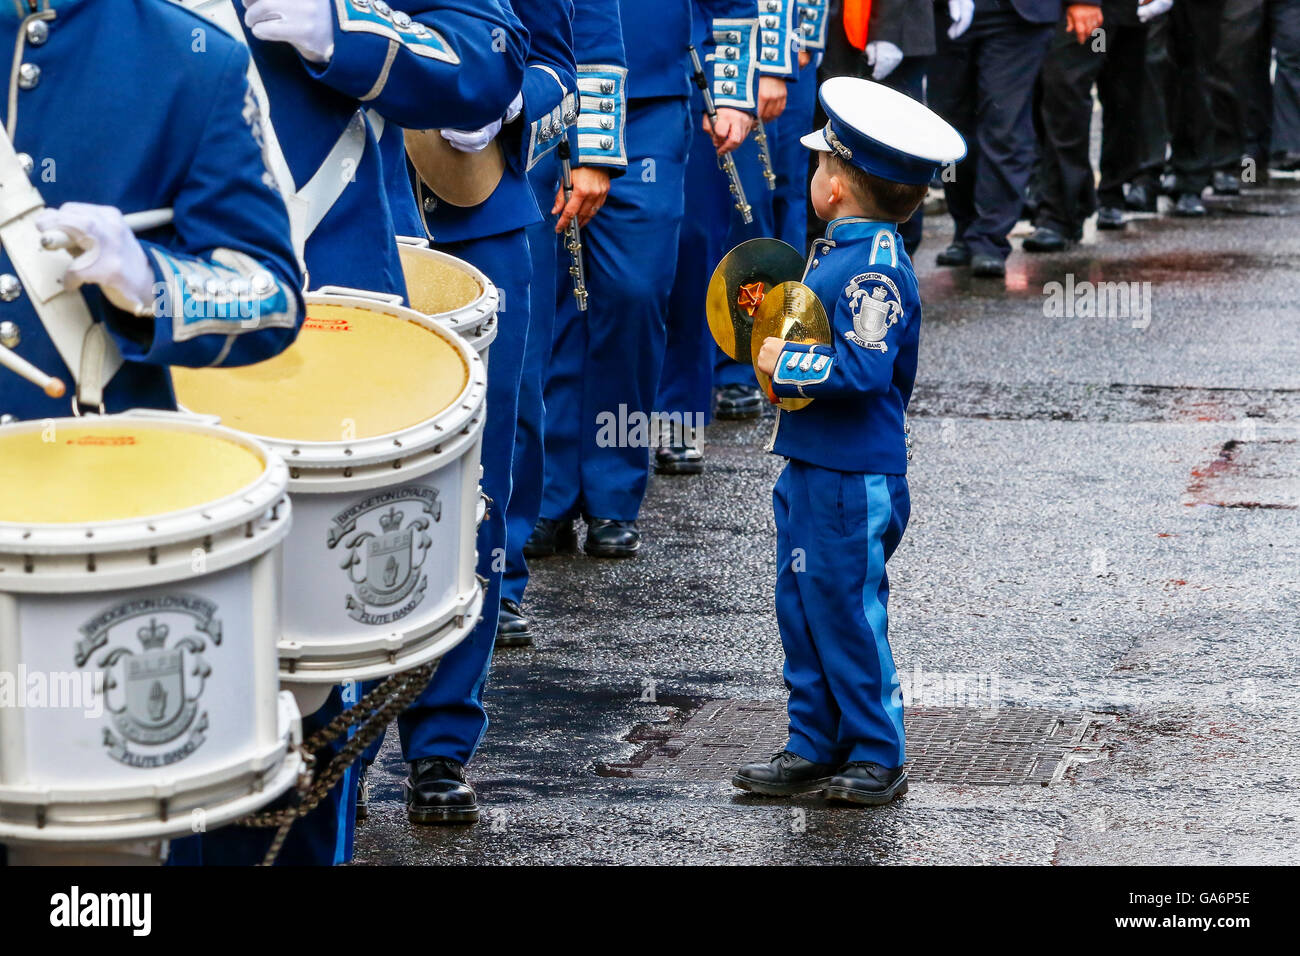 Small boy, in uniform and holding a small set of cymbals, watching the parade of adults walk by, Glasgow, Scotland, UK Stock Photo